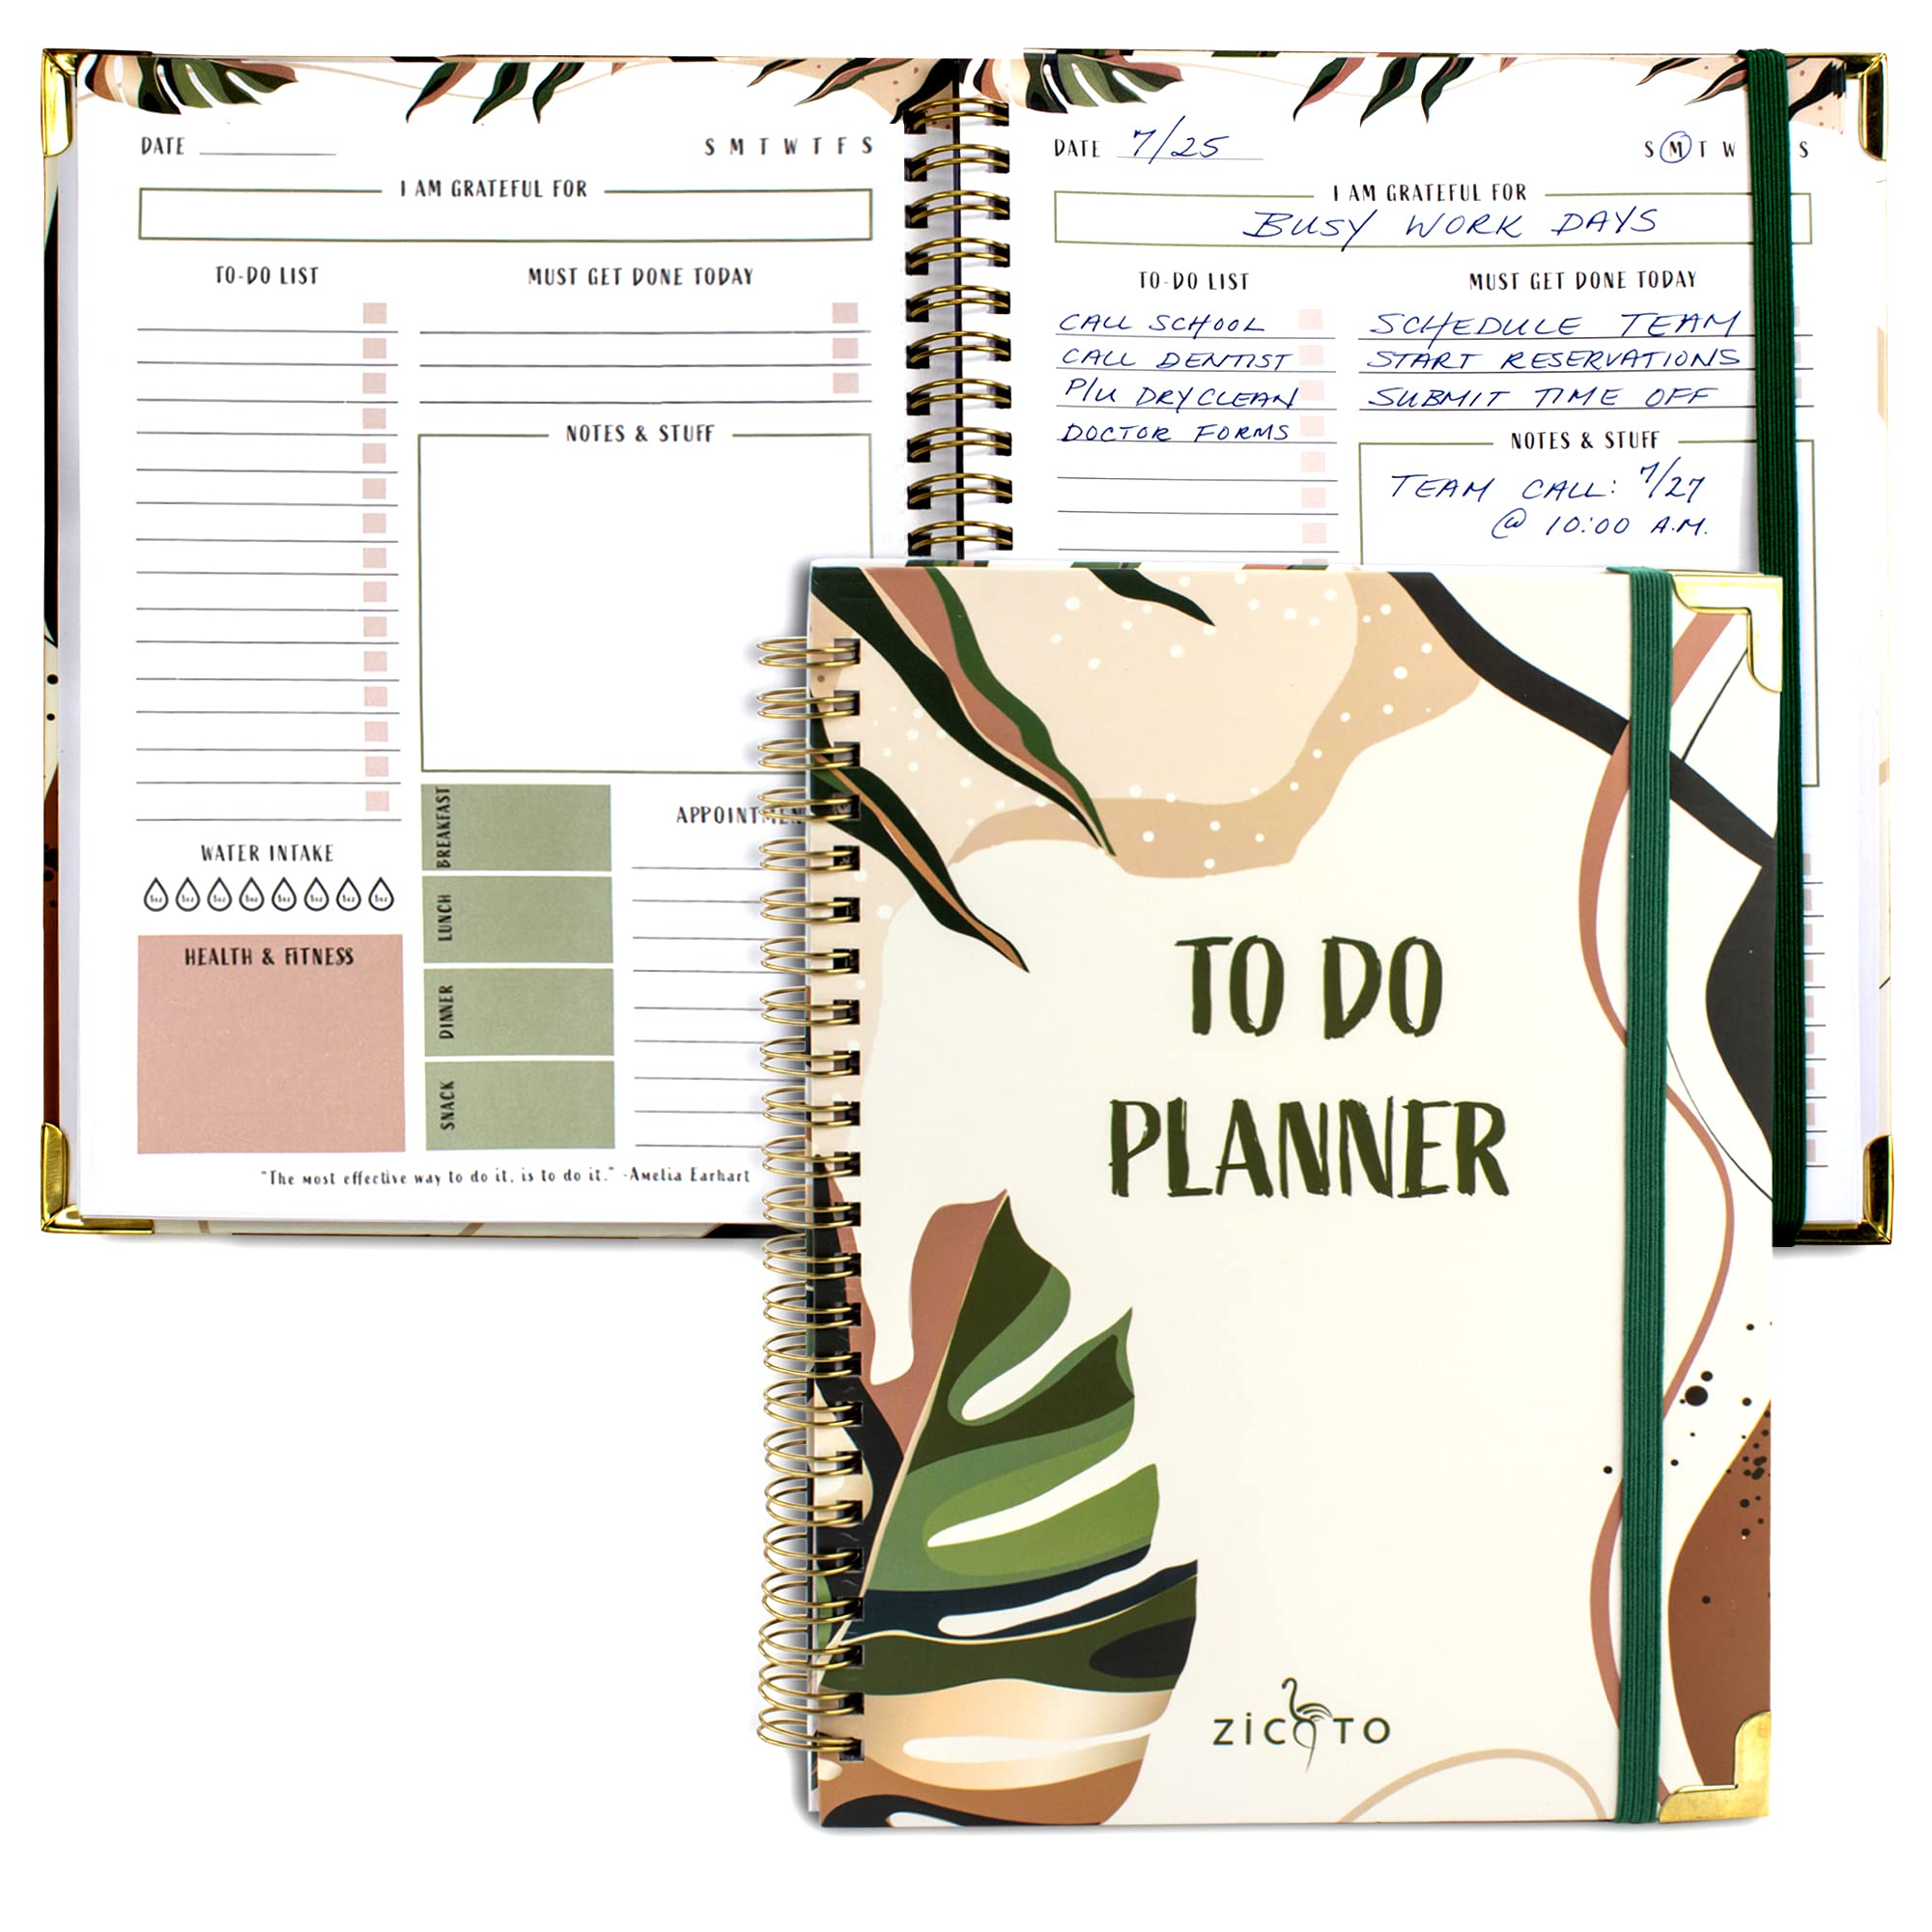 ZICOTO + Simplified To Do List Planner Notebook